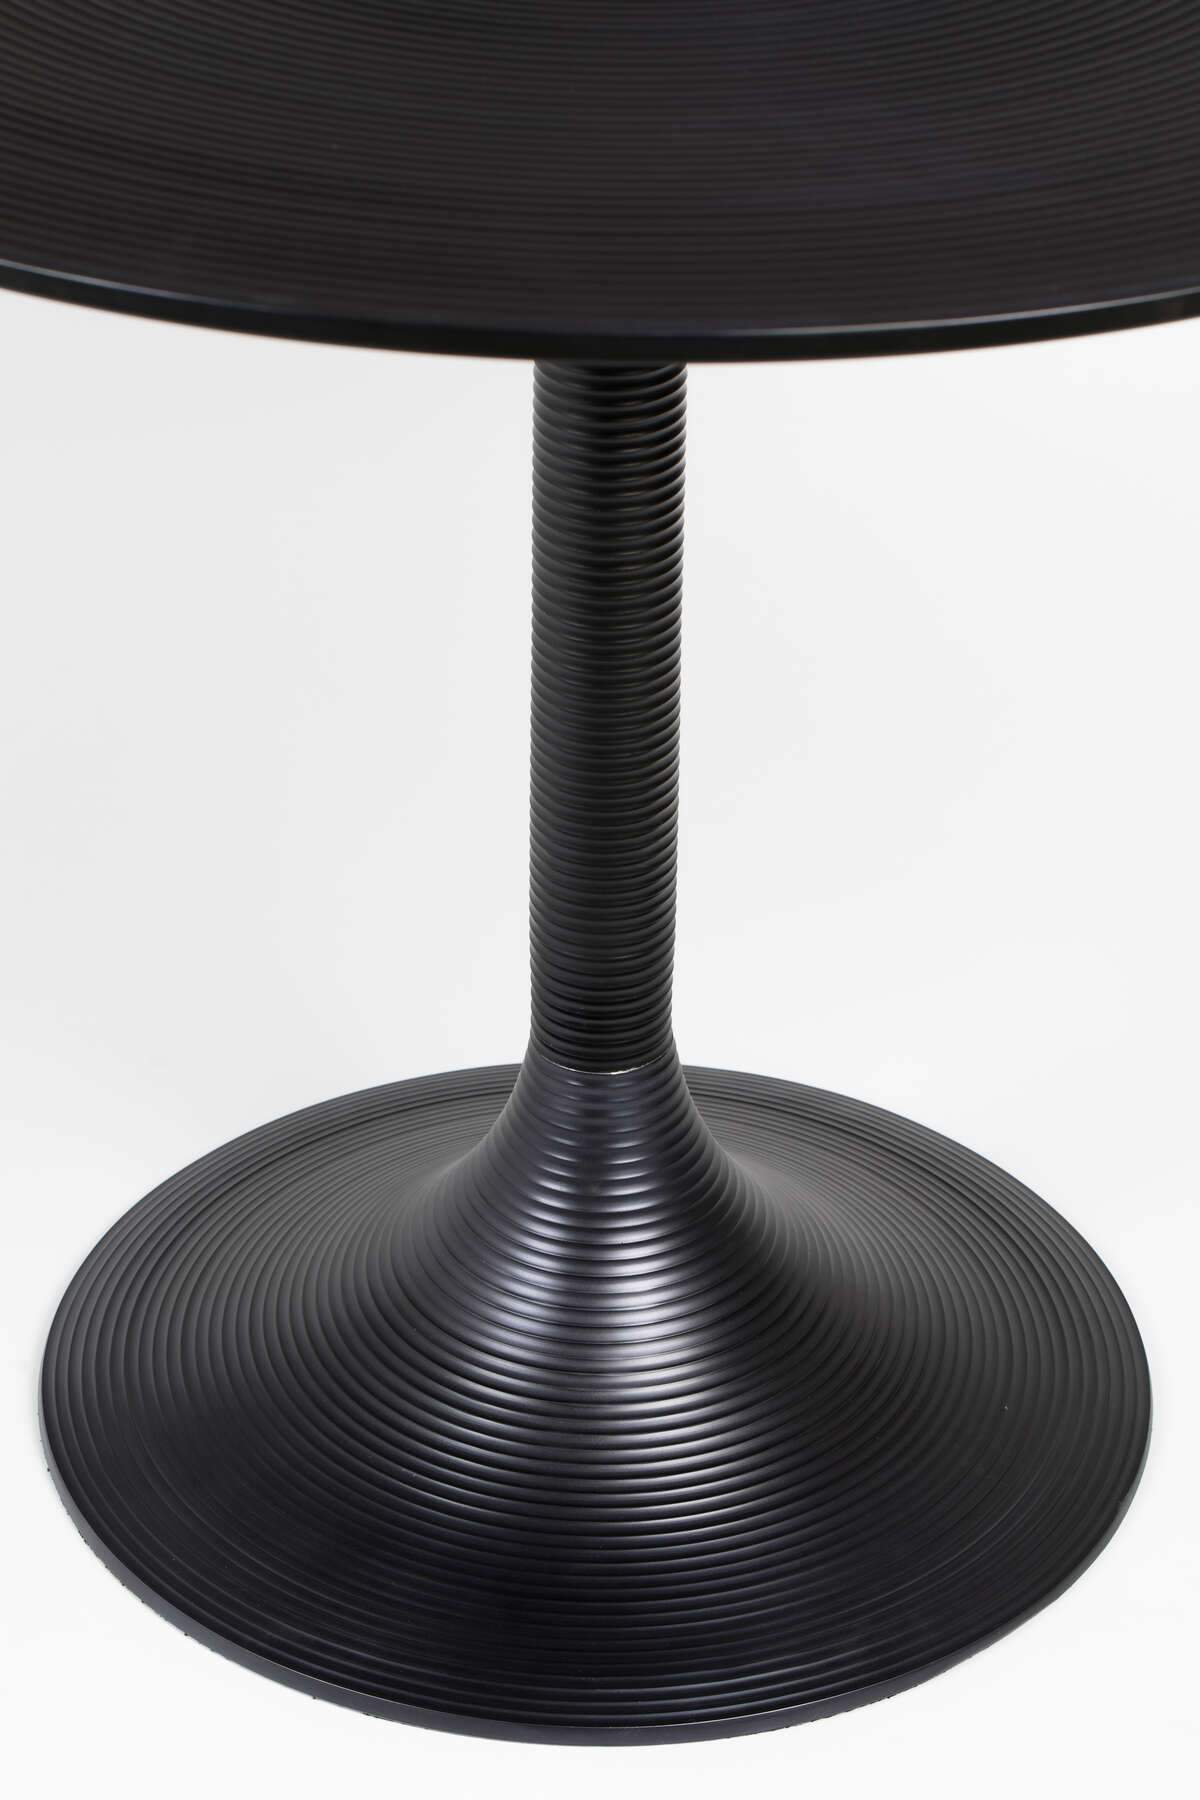 The Bold Monkey Hypnotising Round table in classic black or shimmering gold is exactly what it promises to be: an eye -catching central point. Connect it with one of our designer chairs, and you will receive a dining room set from which you will not be able to take your eyes off.